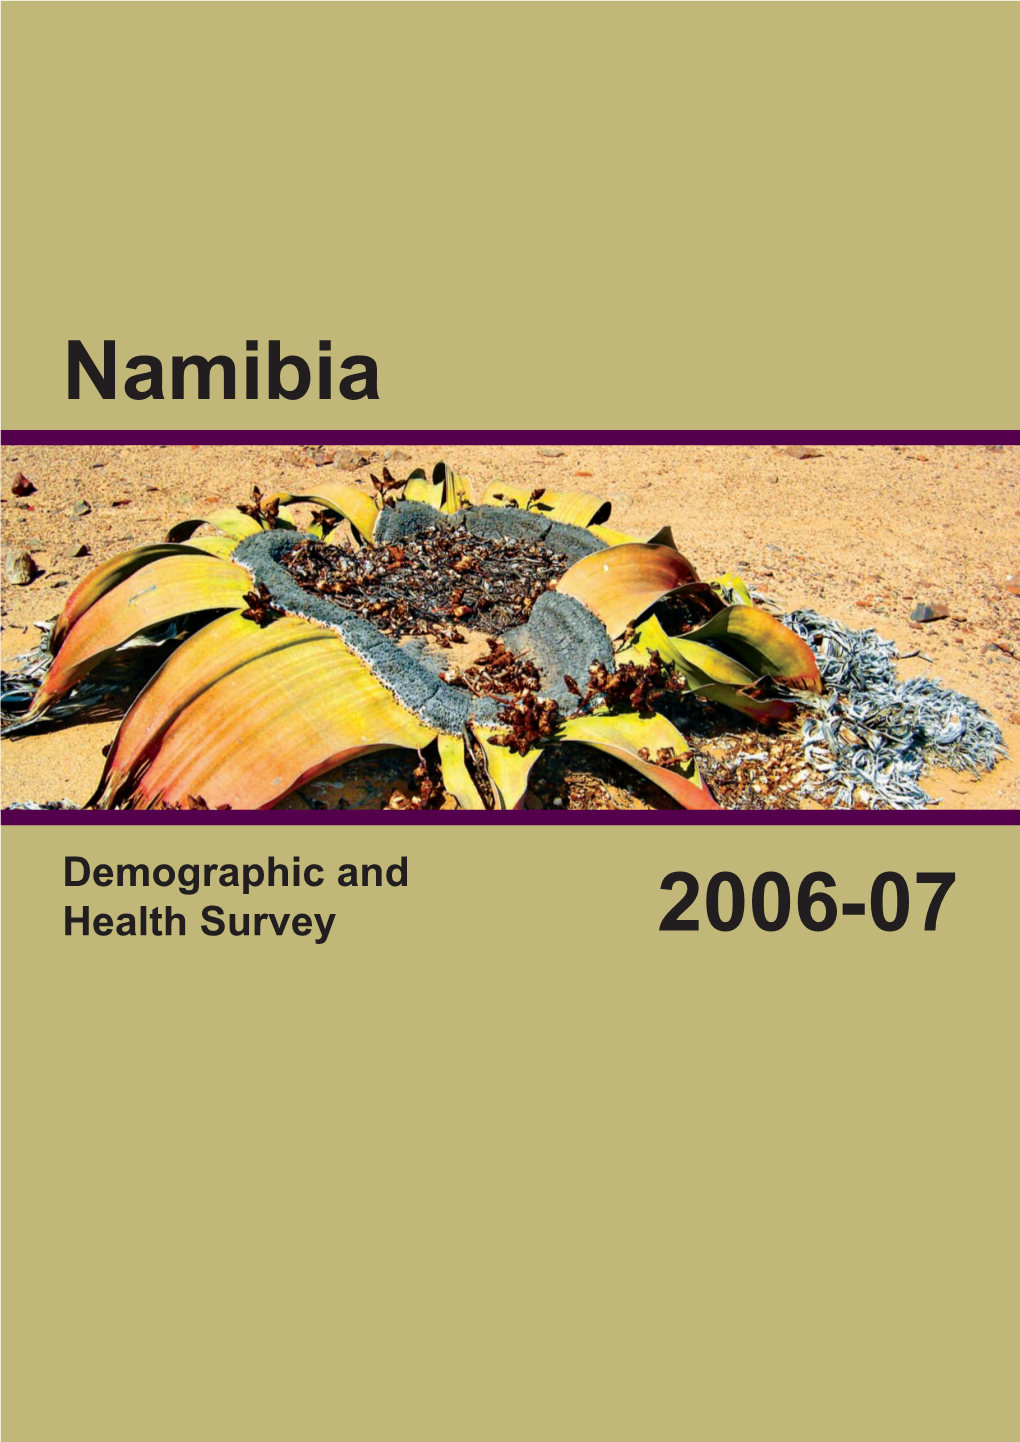 Namibia Demographic and Health Survey 2006-07 [FR204]